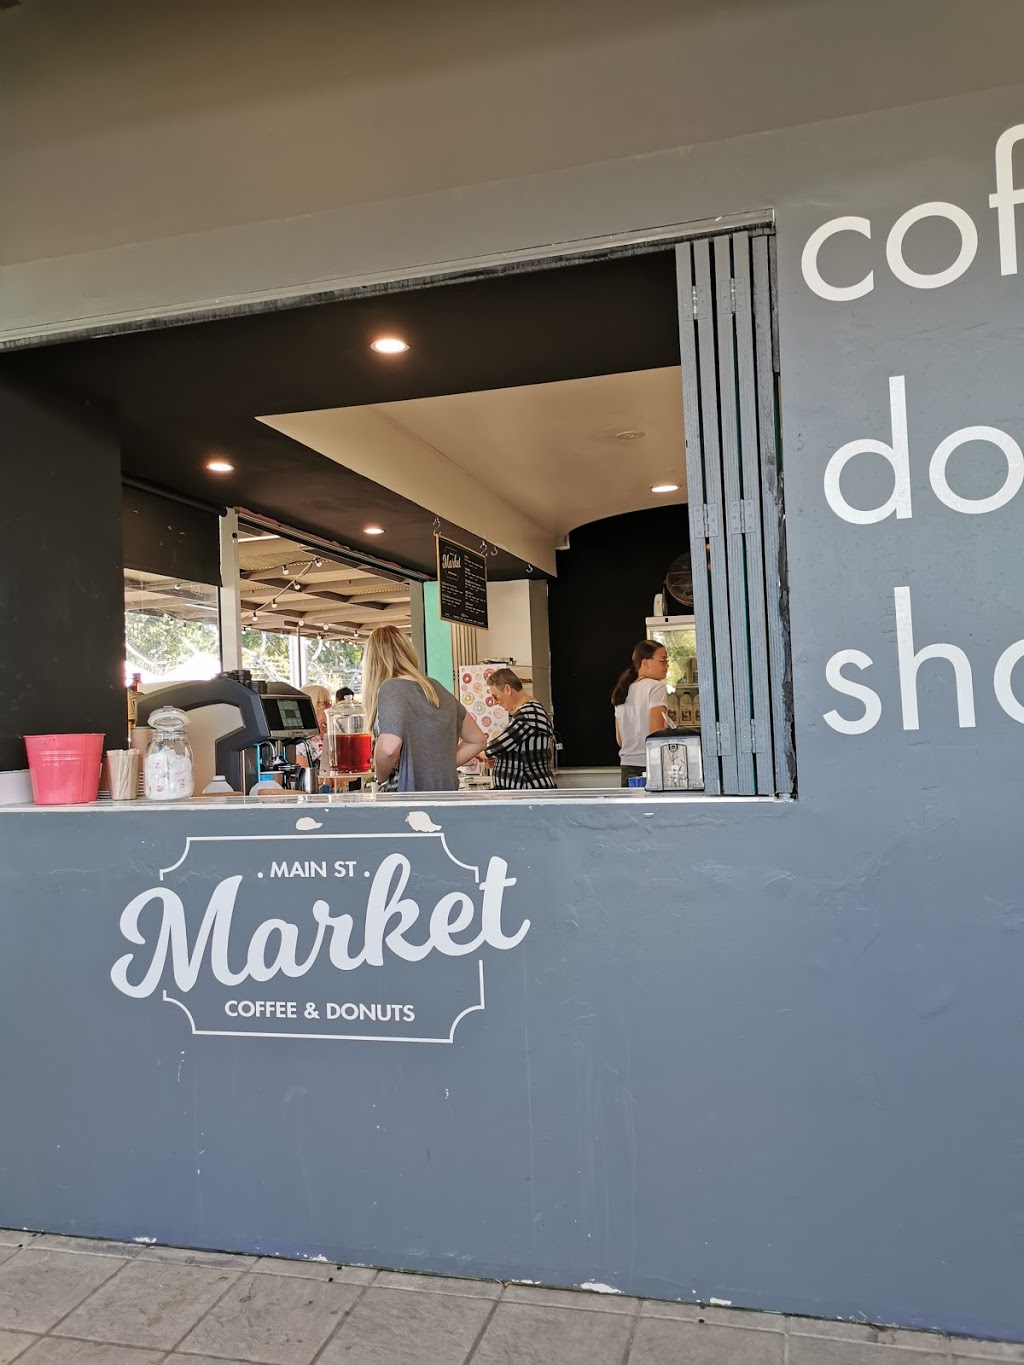 Main St Market Coffee and Donuts | cafe | Stanley St Plaza, South Brisbane QLD 4101, Australia | 0420522029 OR +61 420 522 029